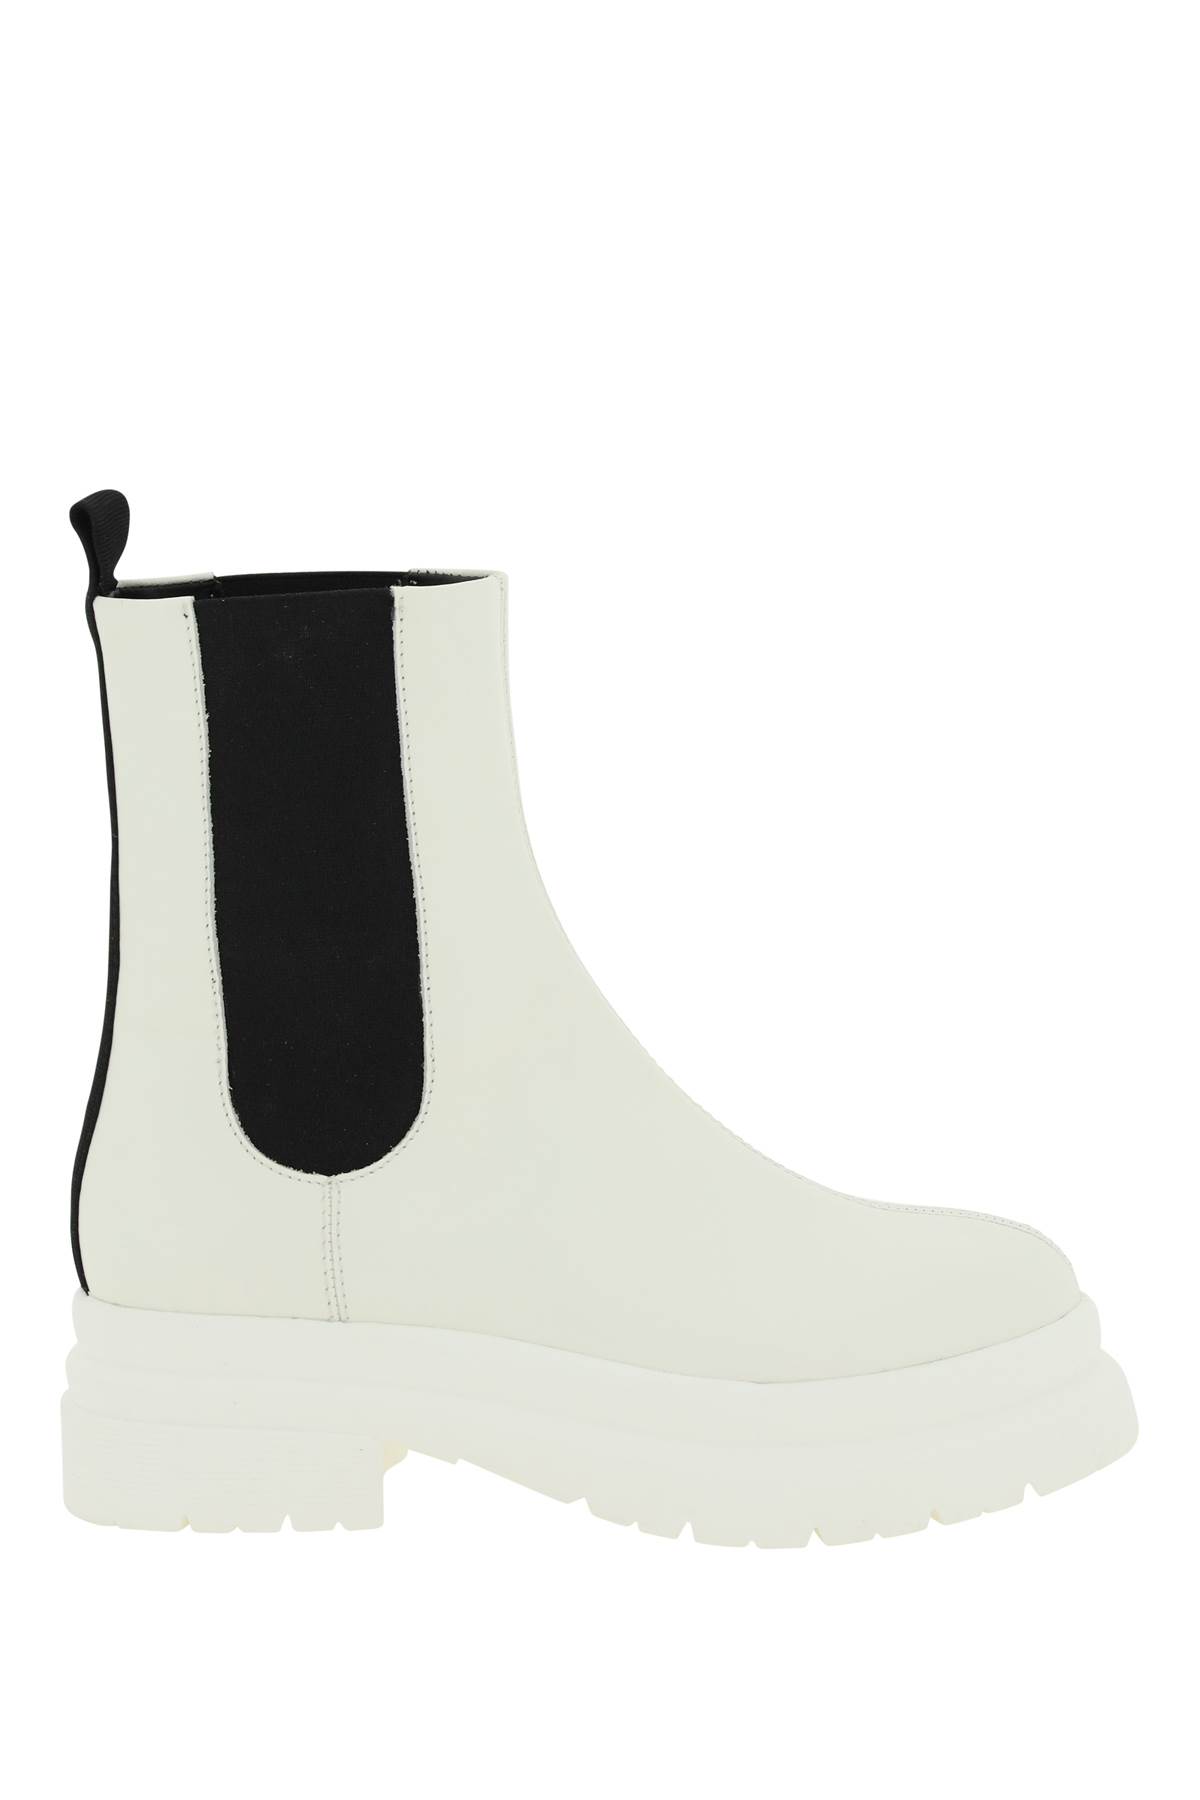 JW ANDERSON LEATHER CHELSEA BOOTS